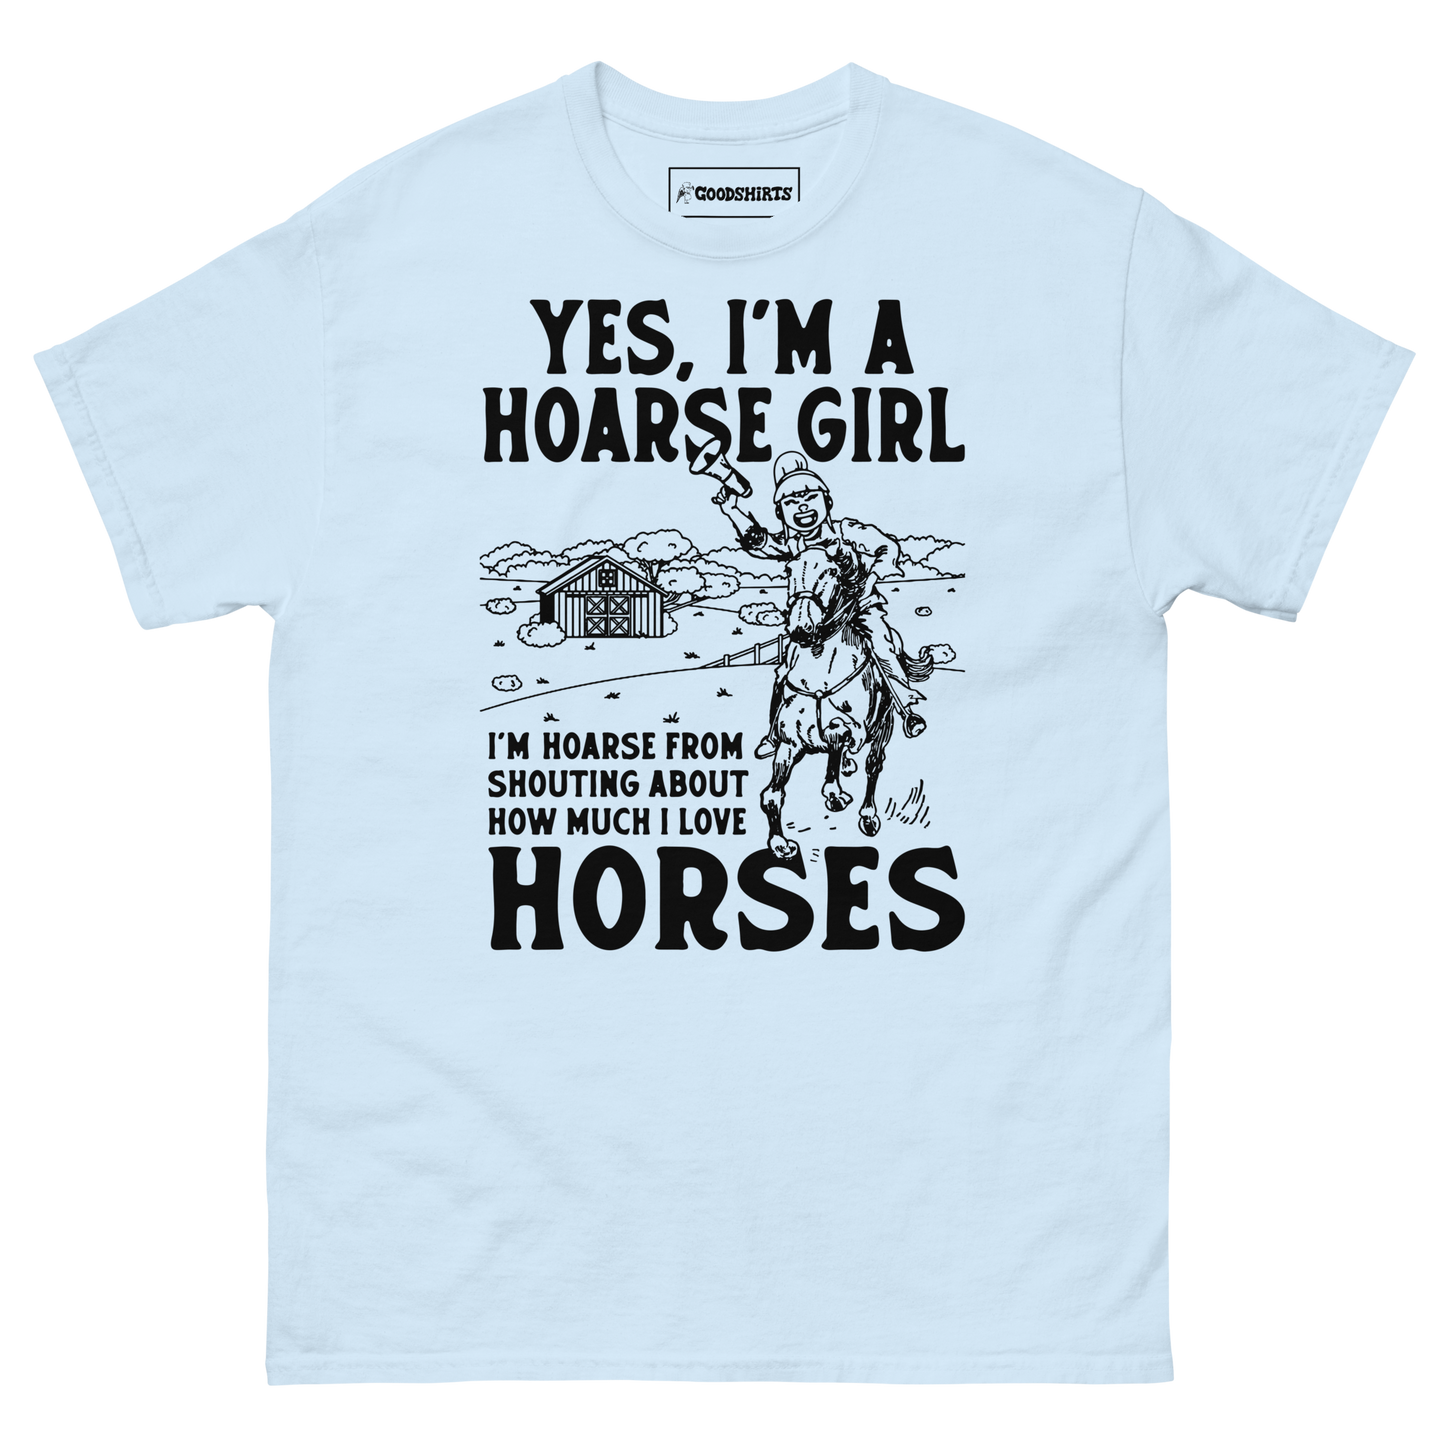 Yes, I'm A Hoarse Girl I'm Hoarse From Shouting About How Much I Love Horses.